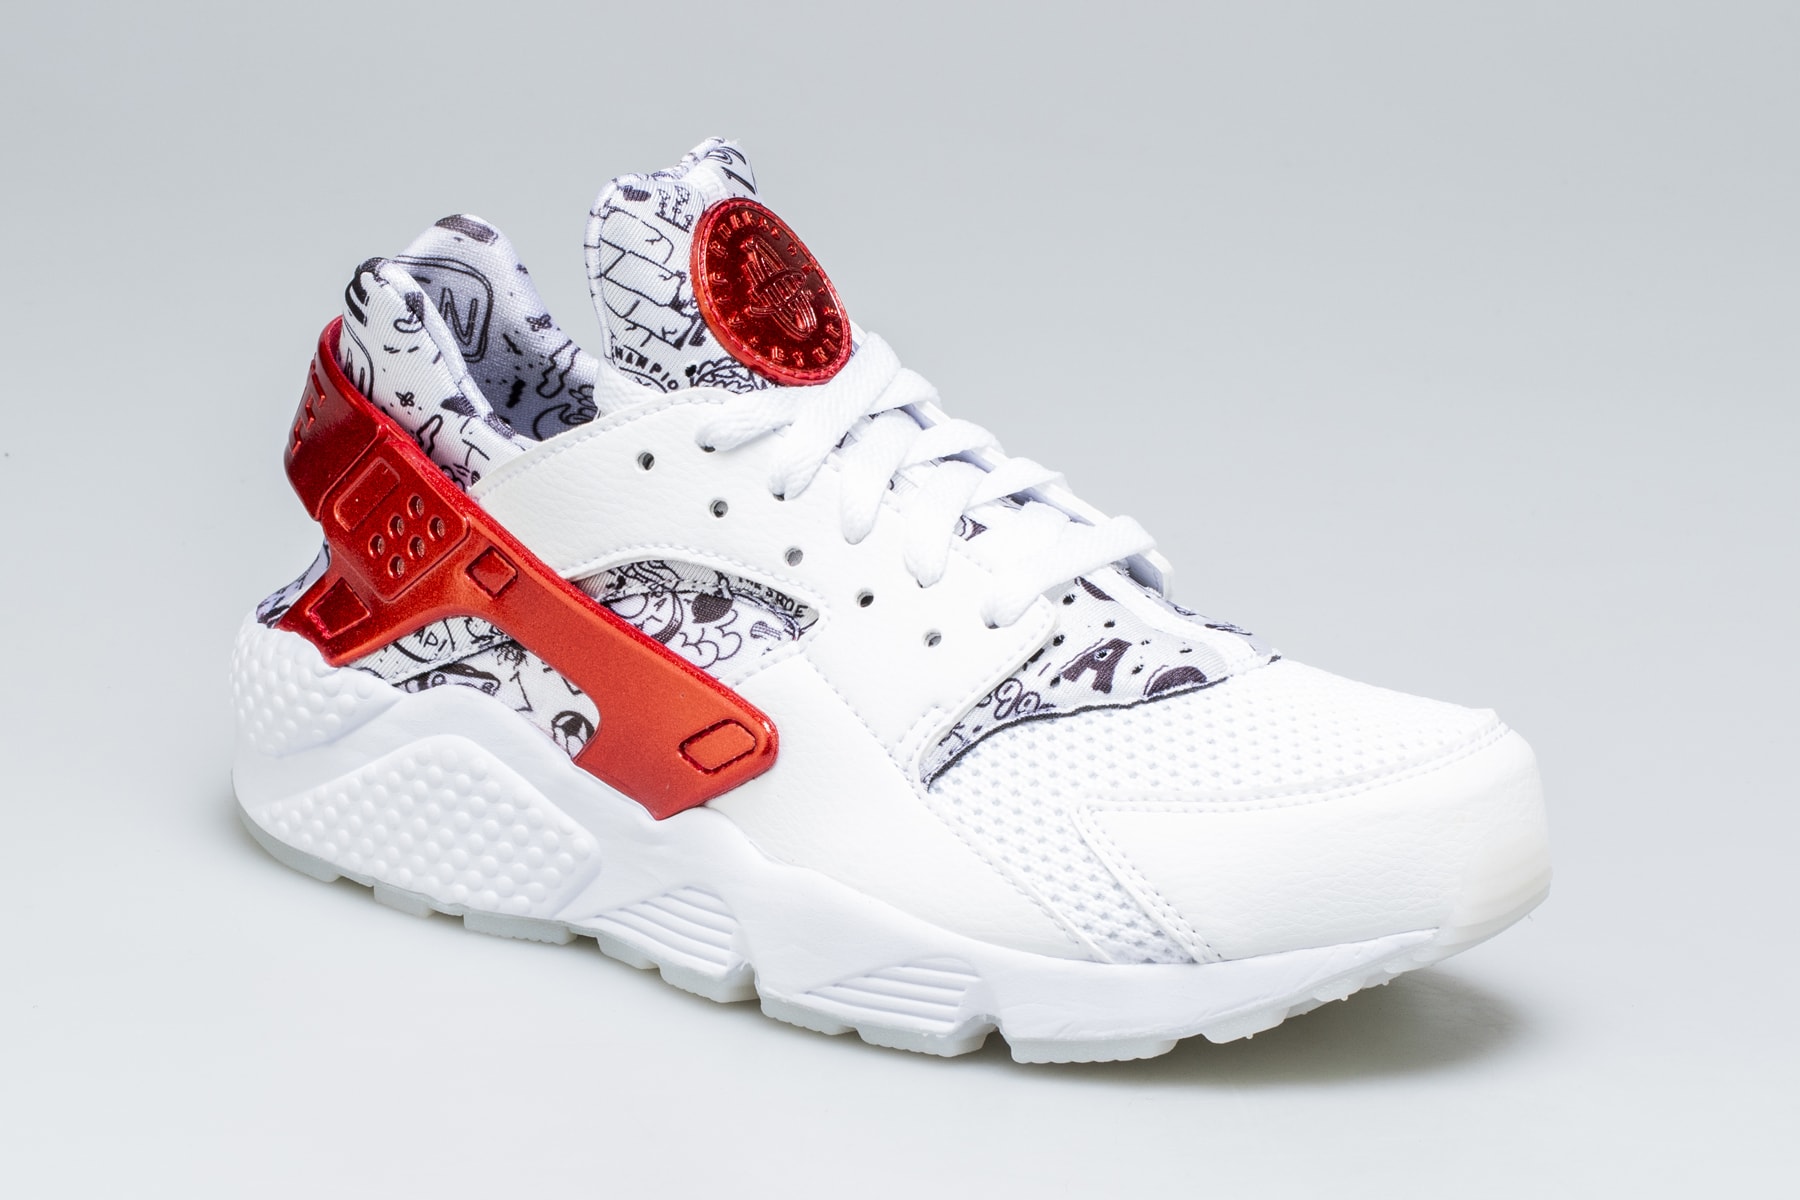 Shoe Palace Nike Air Huarache Release Date info price purchase 25th Anniversary White University Red Platinum colorway Joonbug July 28